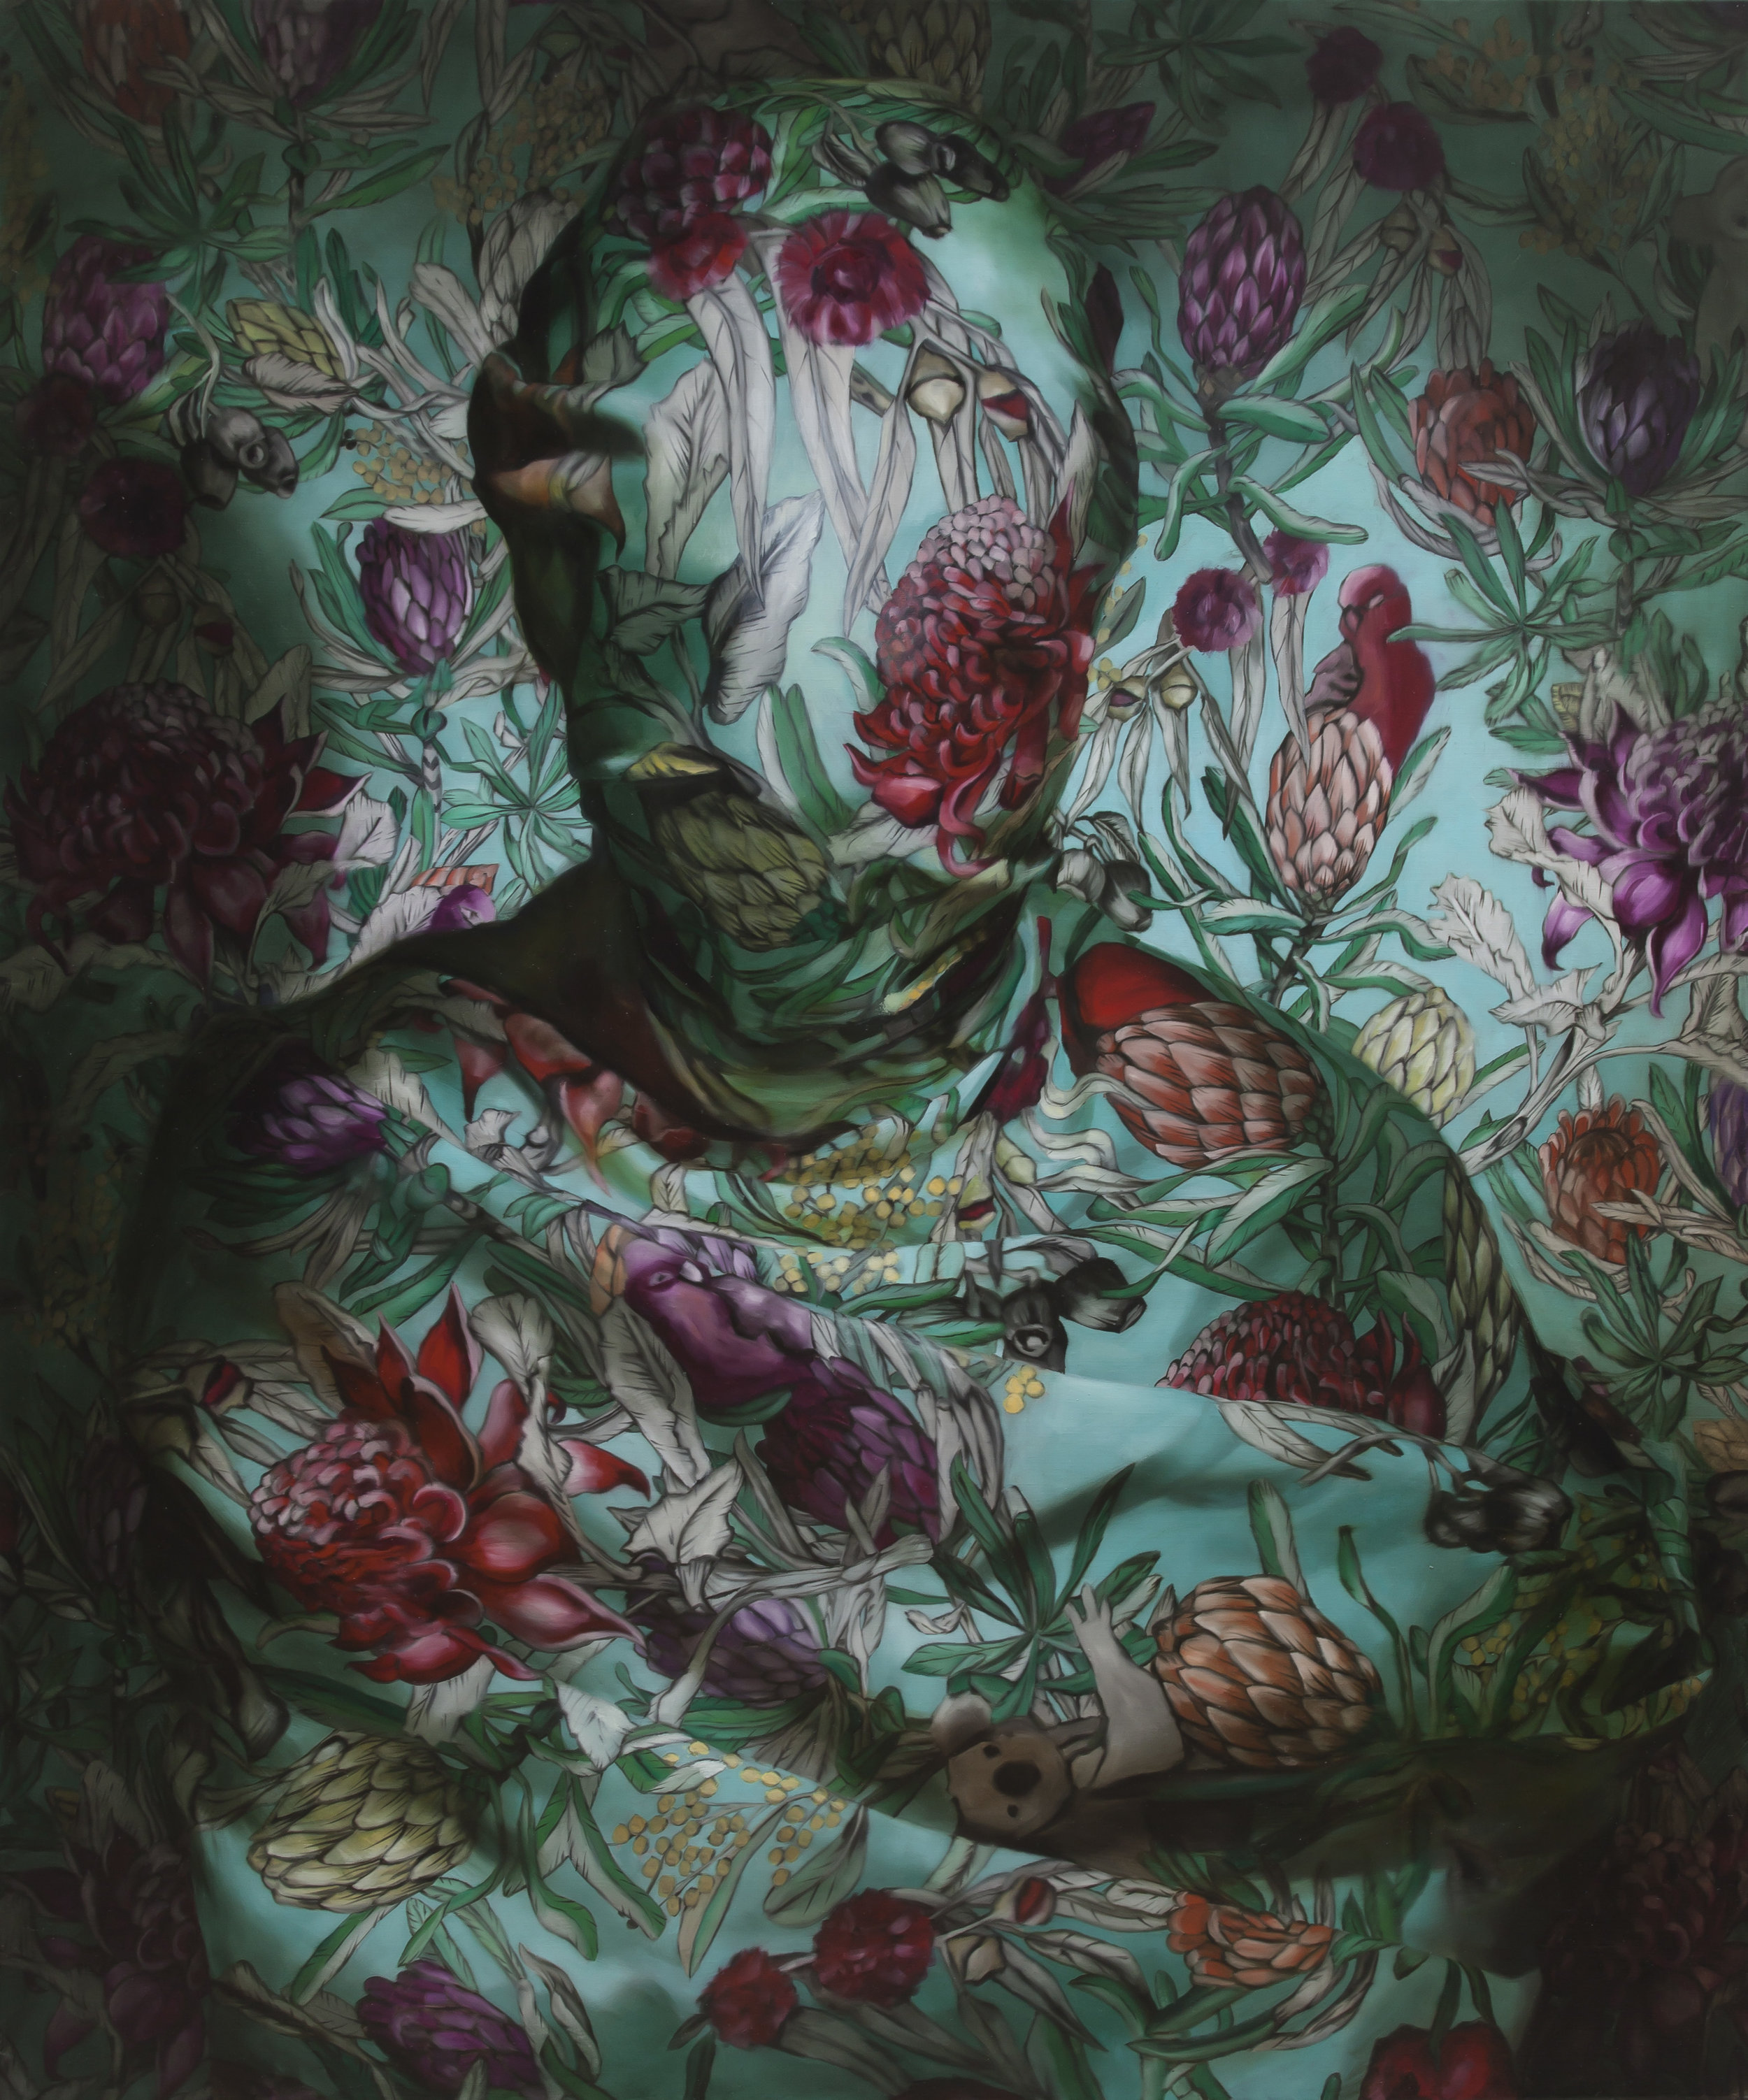 No one can see you, 2018, Markus Åkesson, 120x100cmcm, oil on canvas.jpg